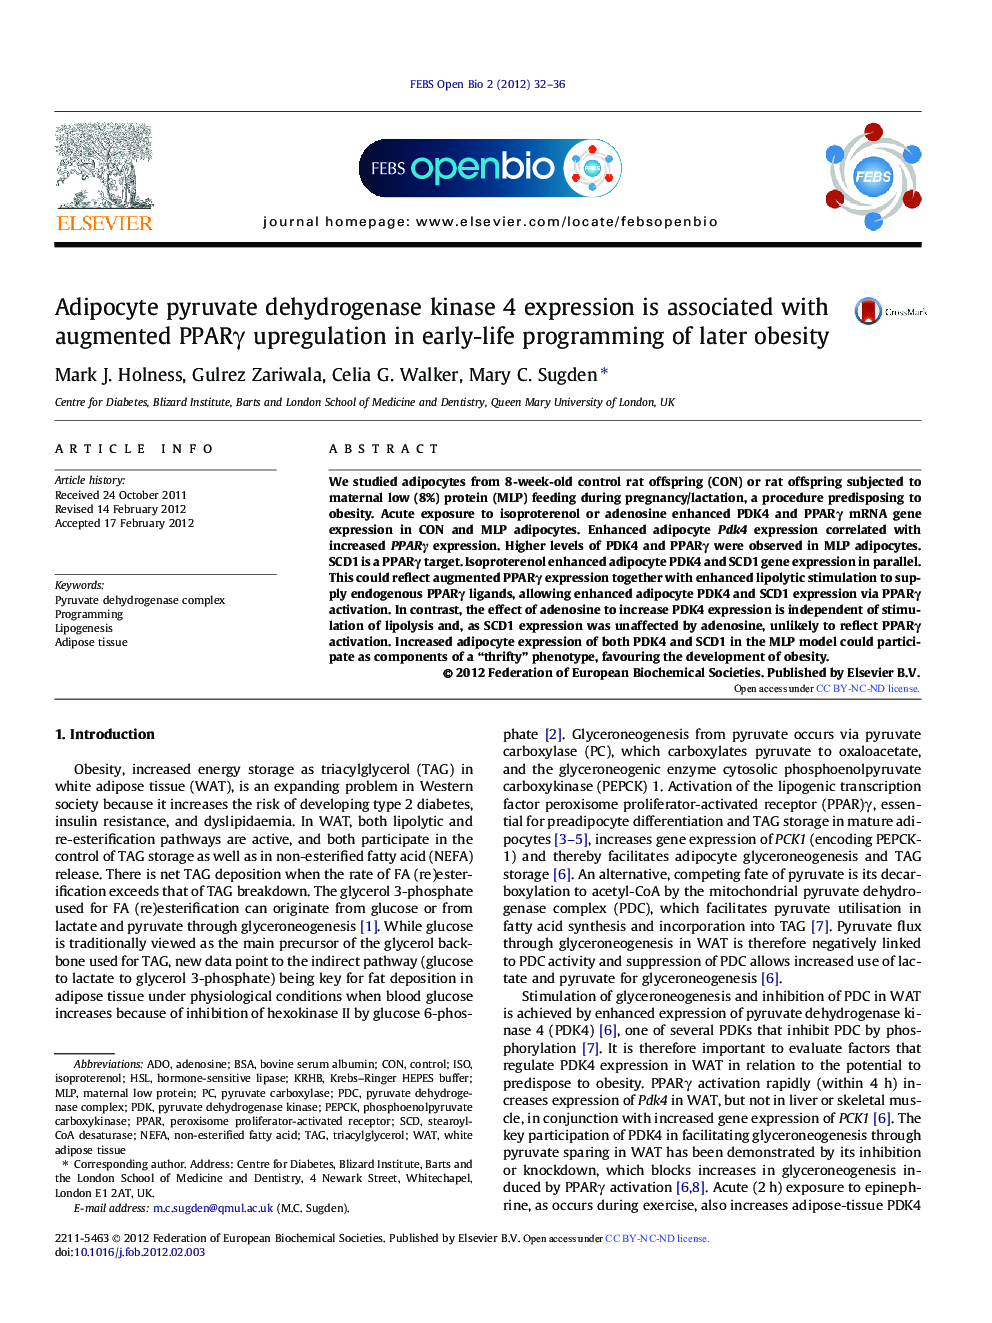 Adipocyte pyruvate dehydrogenase kinase 4 expression is associated with augmented PPARγ upregulation in early-life programming of later obesity